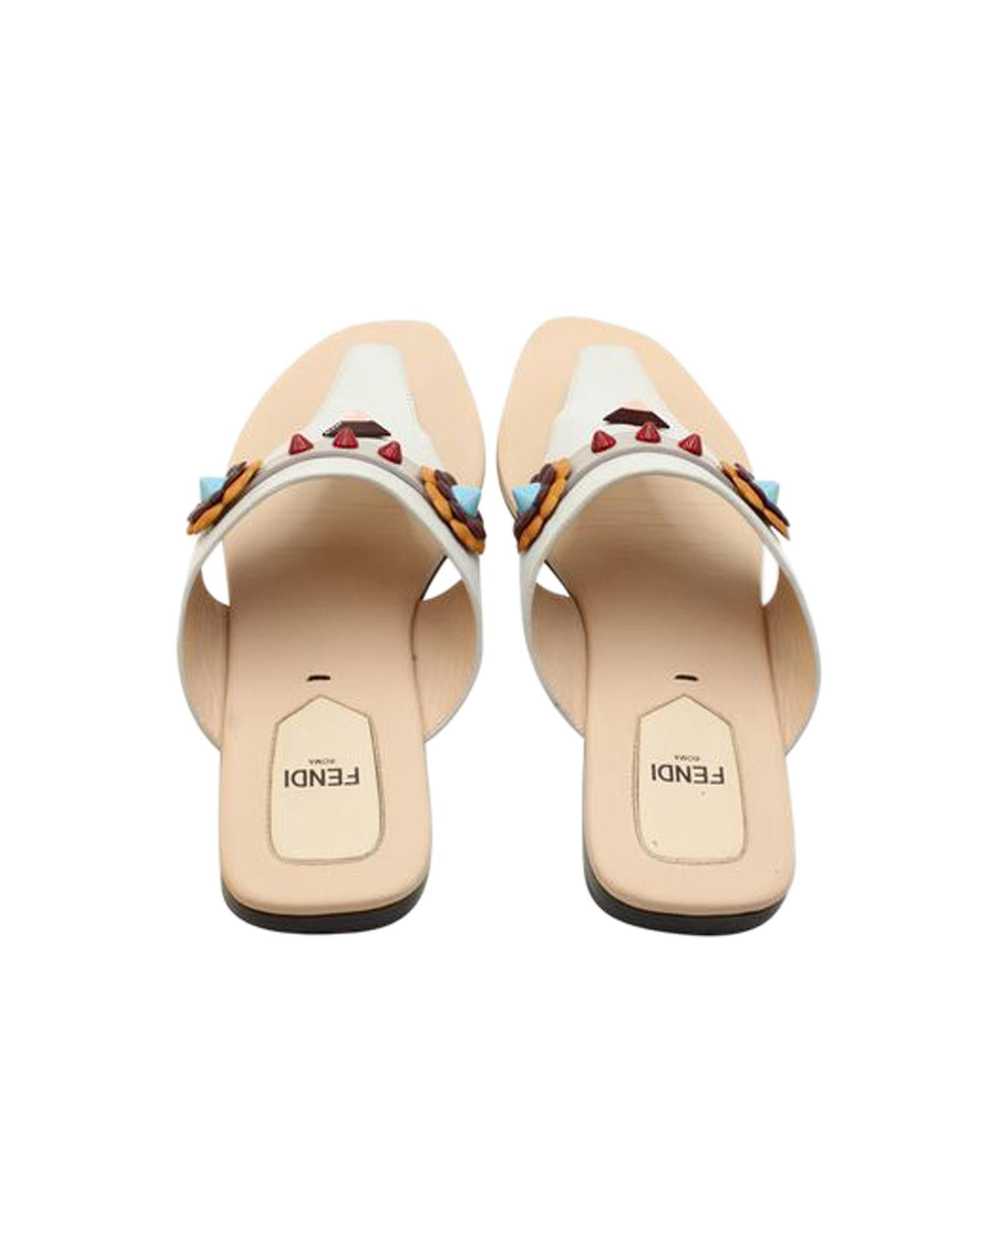 Fendi Leather Studded Thong Sandals from Italy - image 4